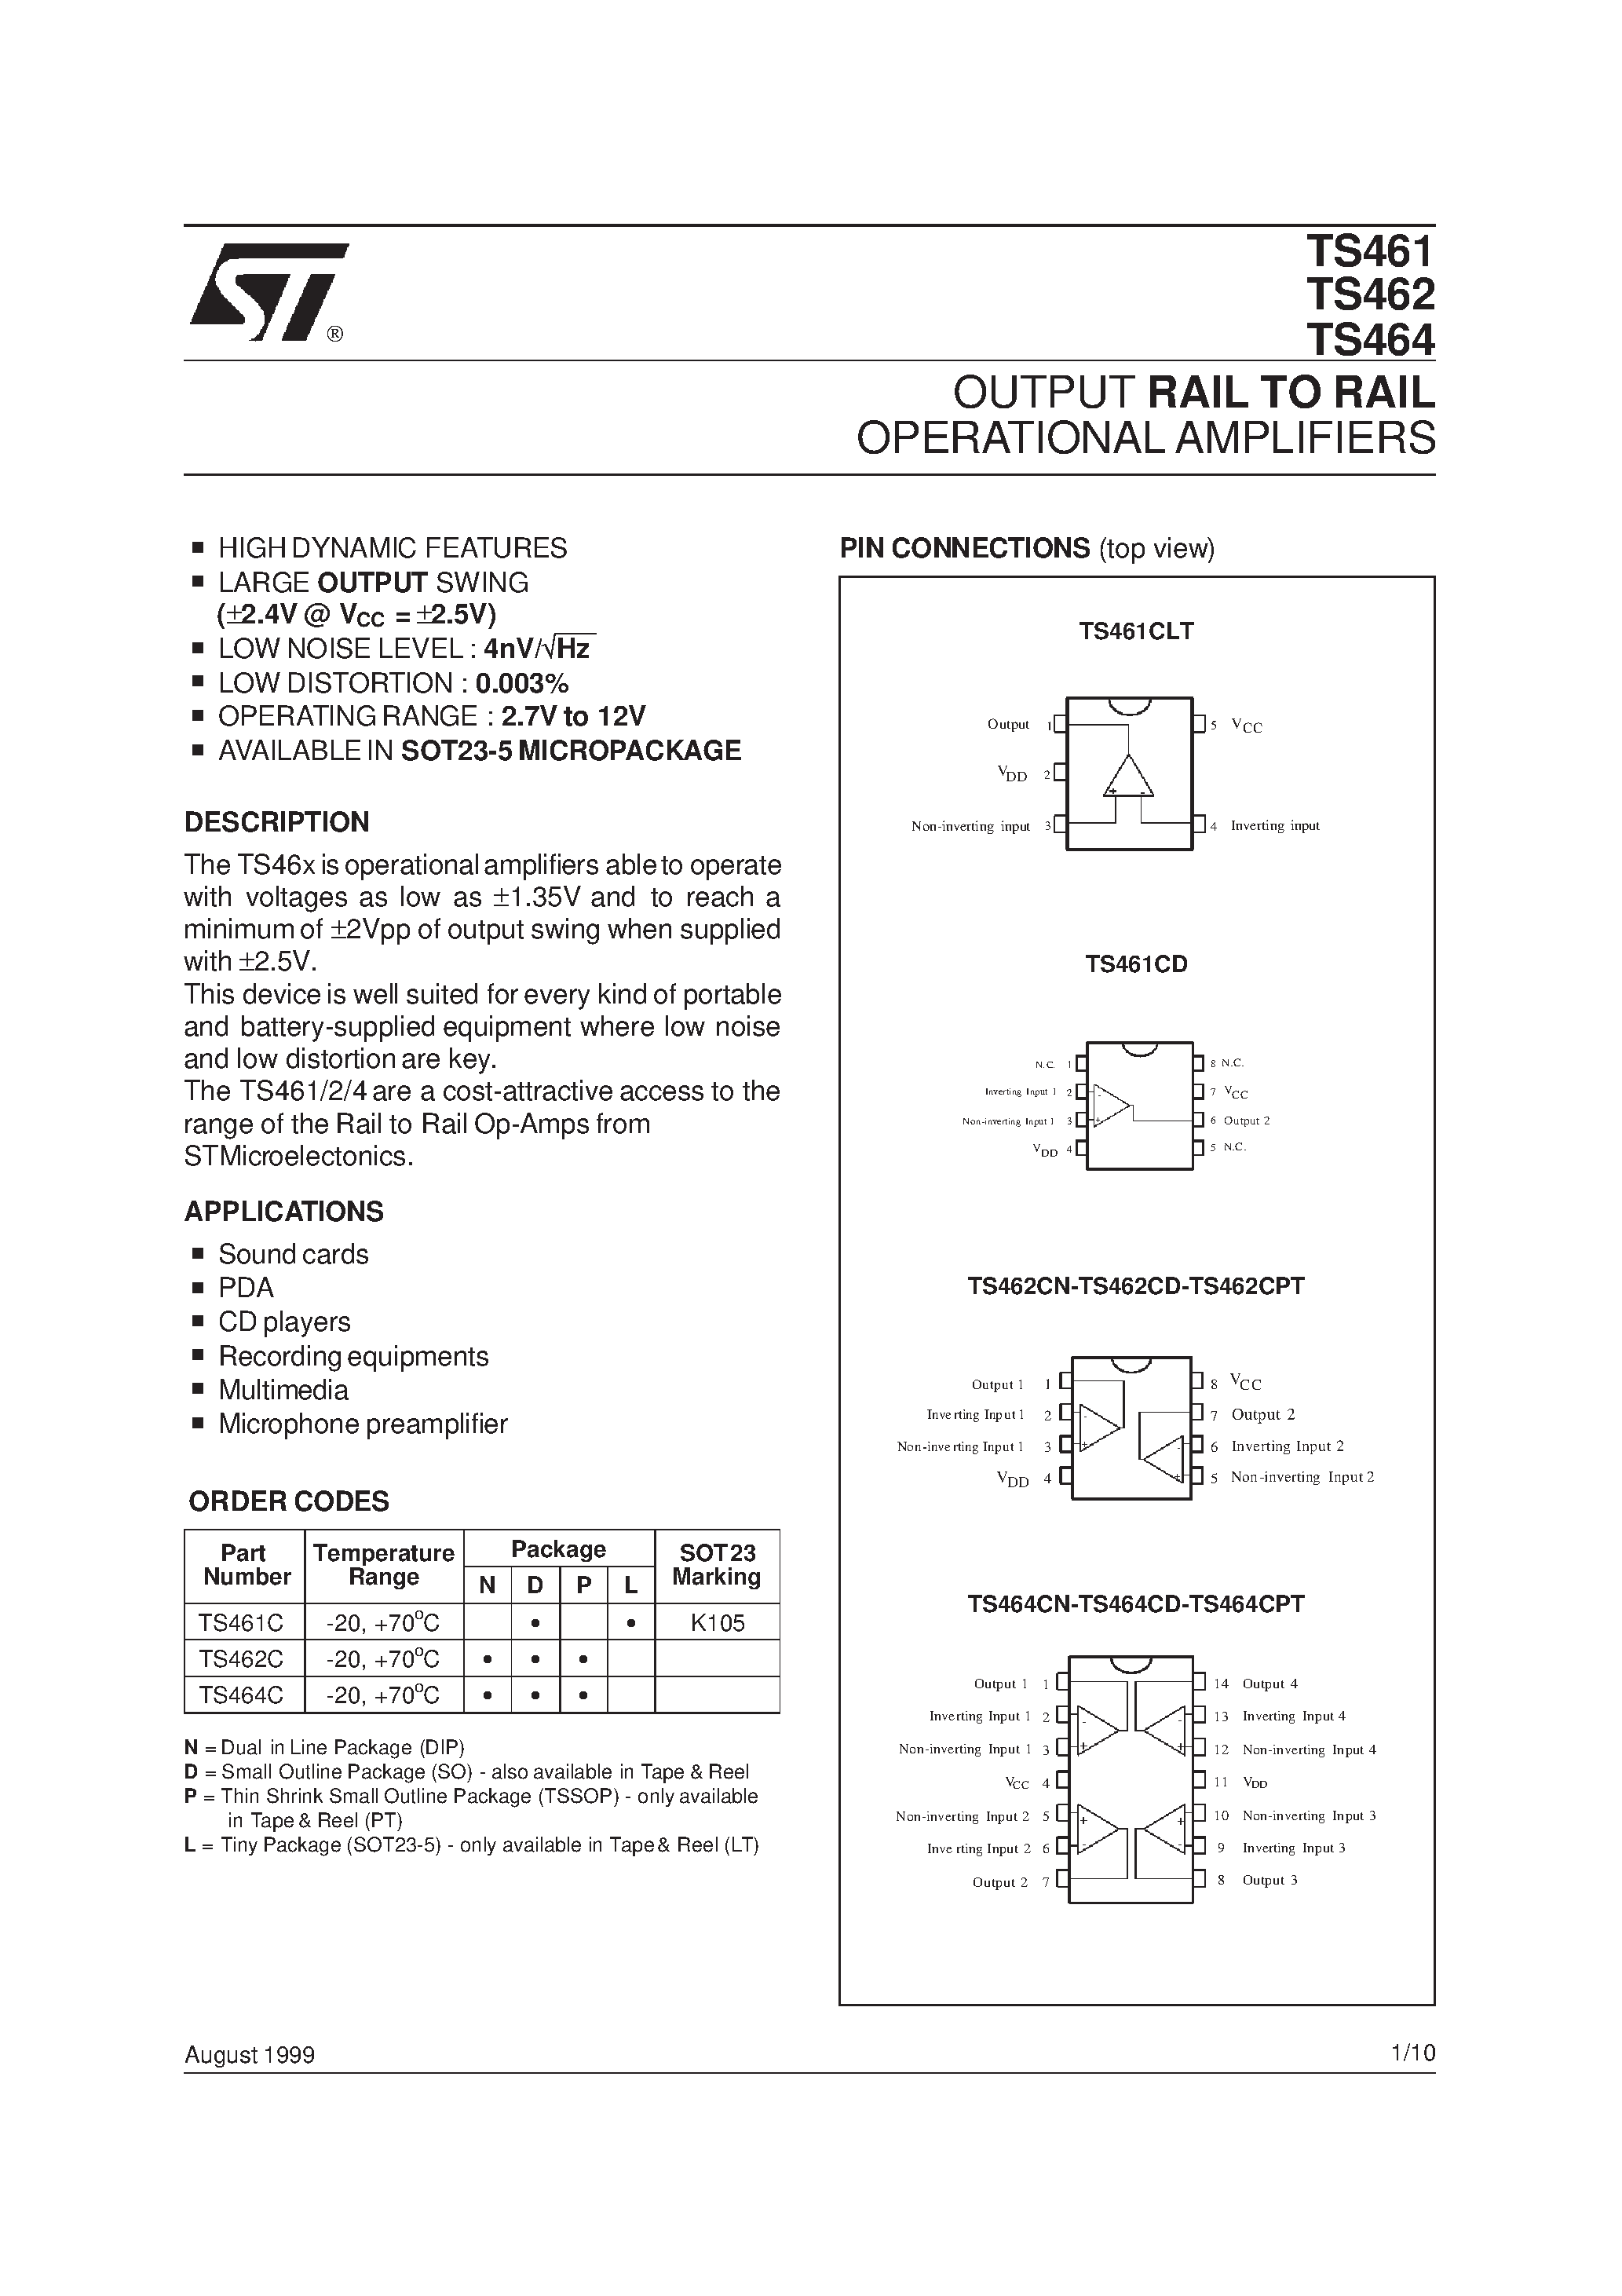 Datasheet TS462CPT - OUTPUT RAIL TO RAIL OPERATIONAL AMPLIFIERS page 1